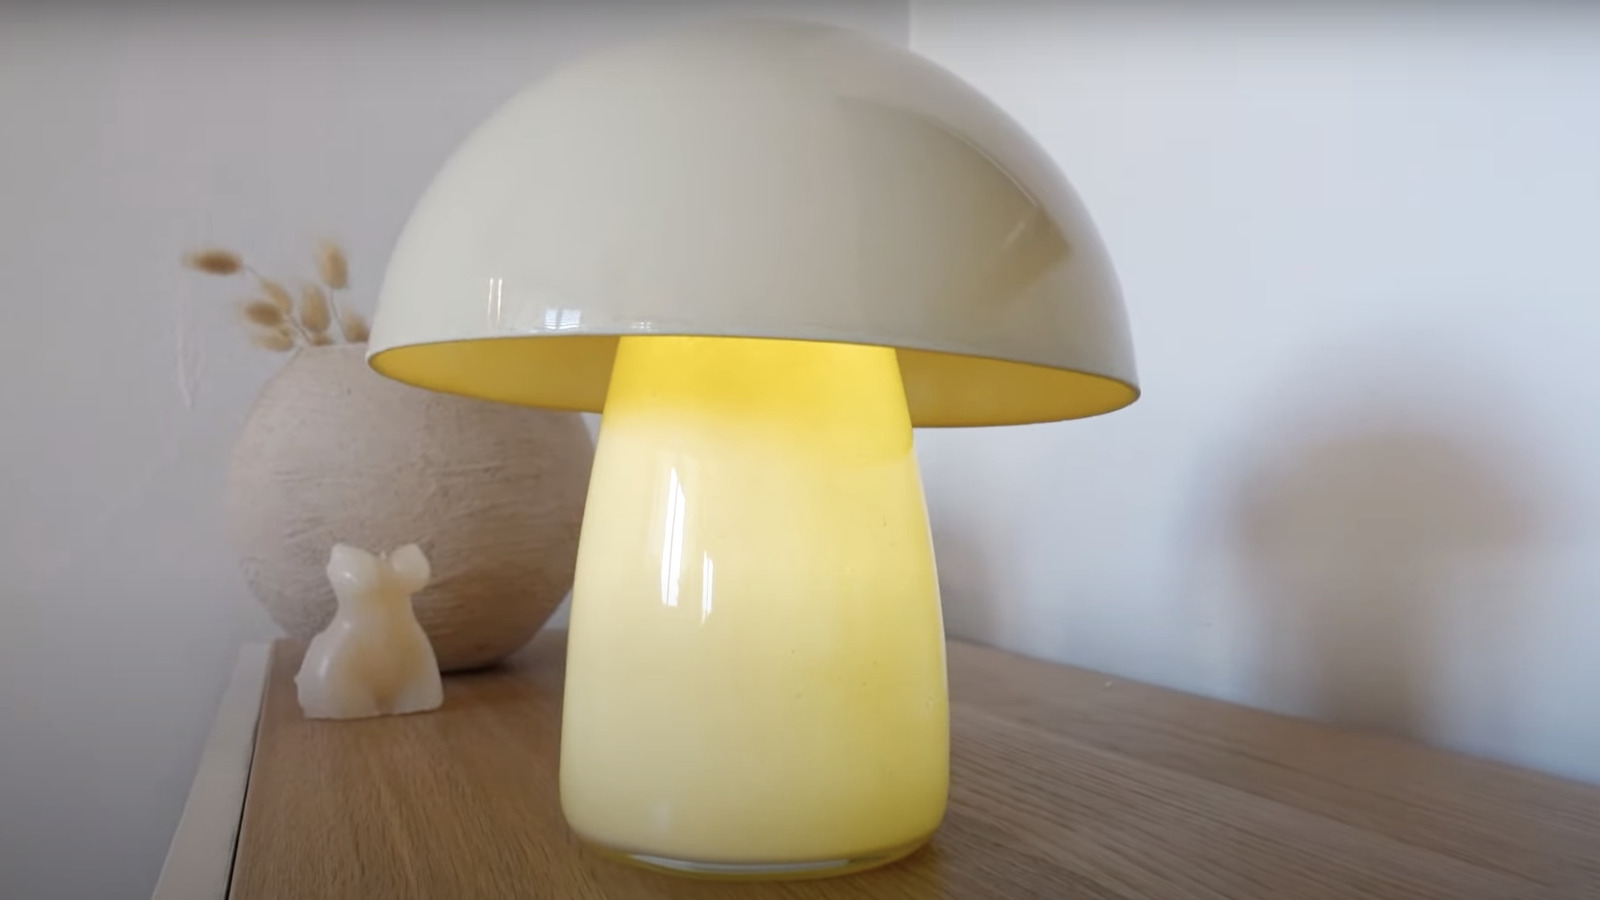 https://www.housedigest.com/img/gallery/how-to-diy-a-lamp-from-ikea-products/l-intro-1687413754.jpg